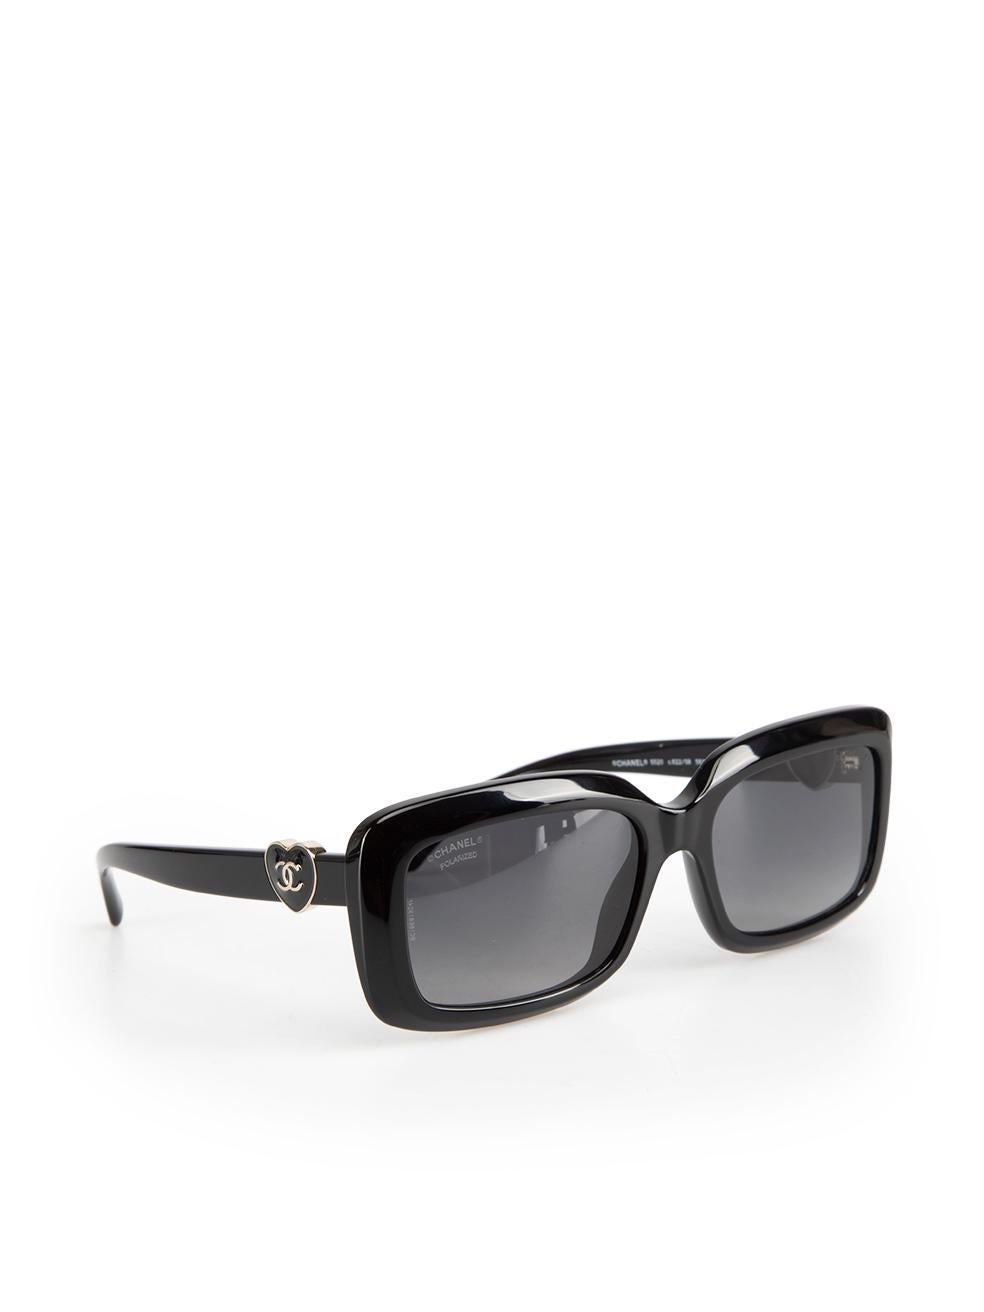 Chanel Black Heart Logo Rectangle Sunglasses In New Condition For Sale In London, GB